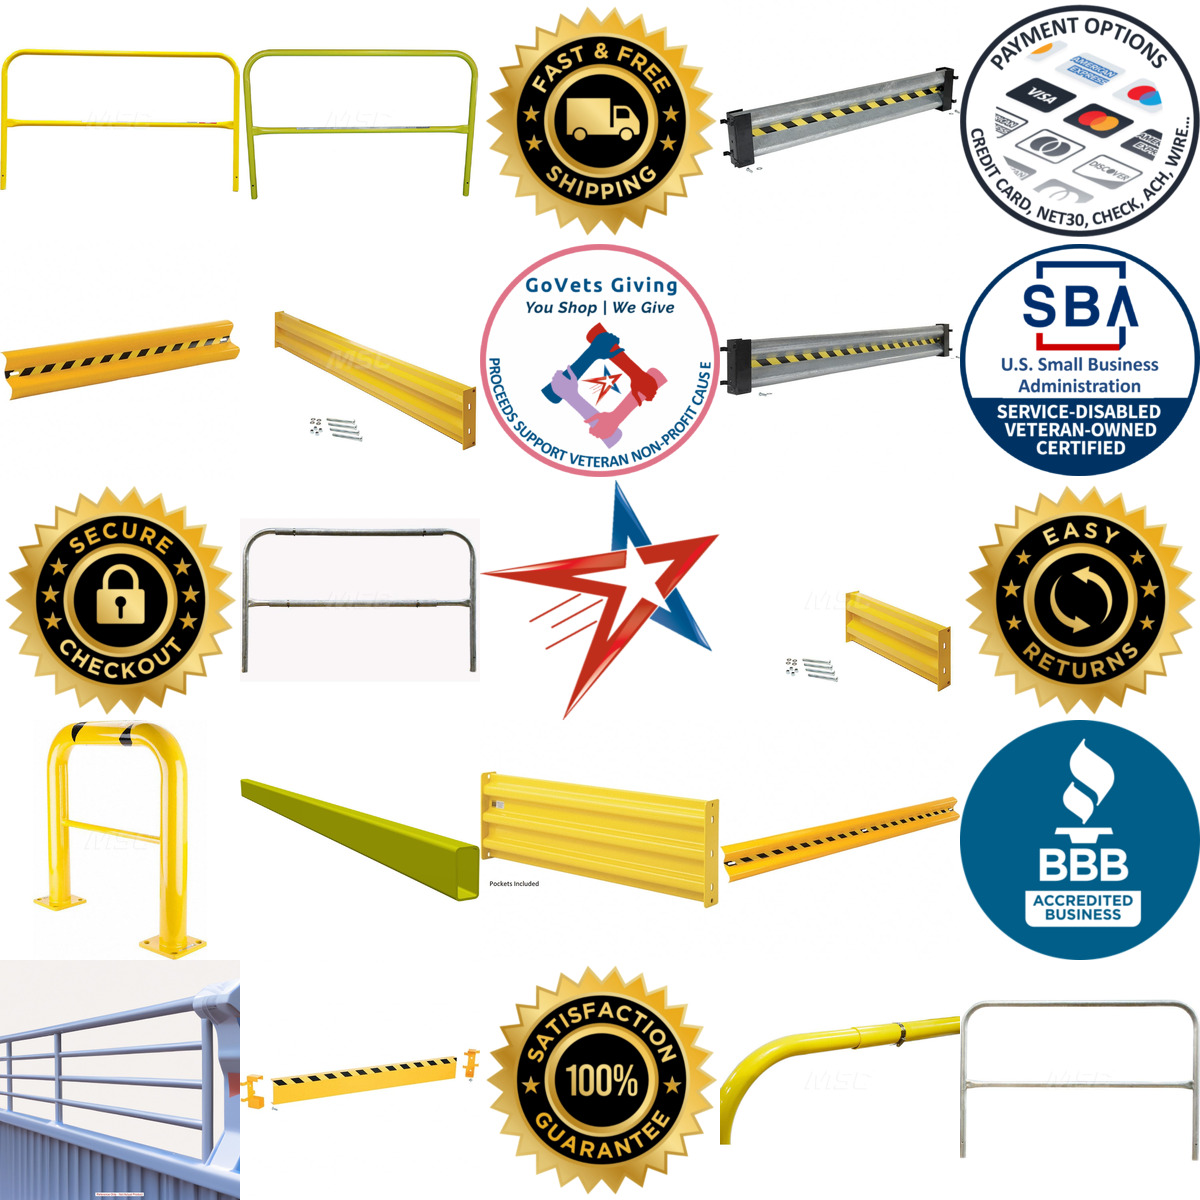 A selection of Guard Rail products on GoVets